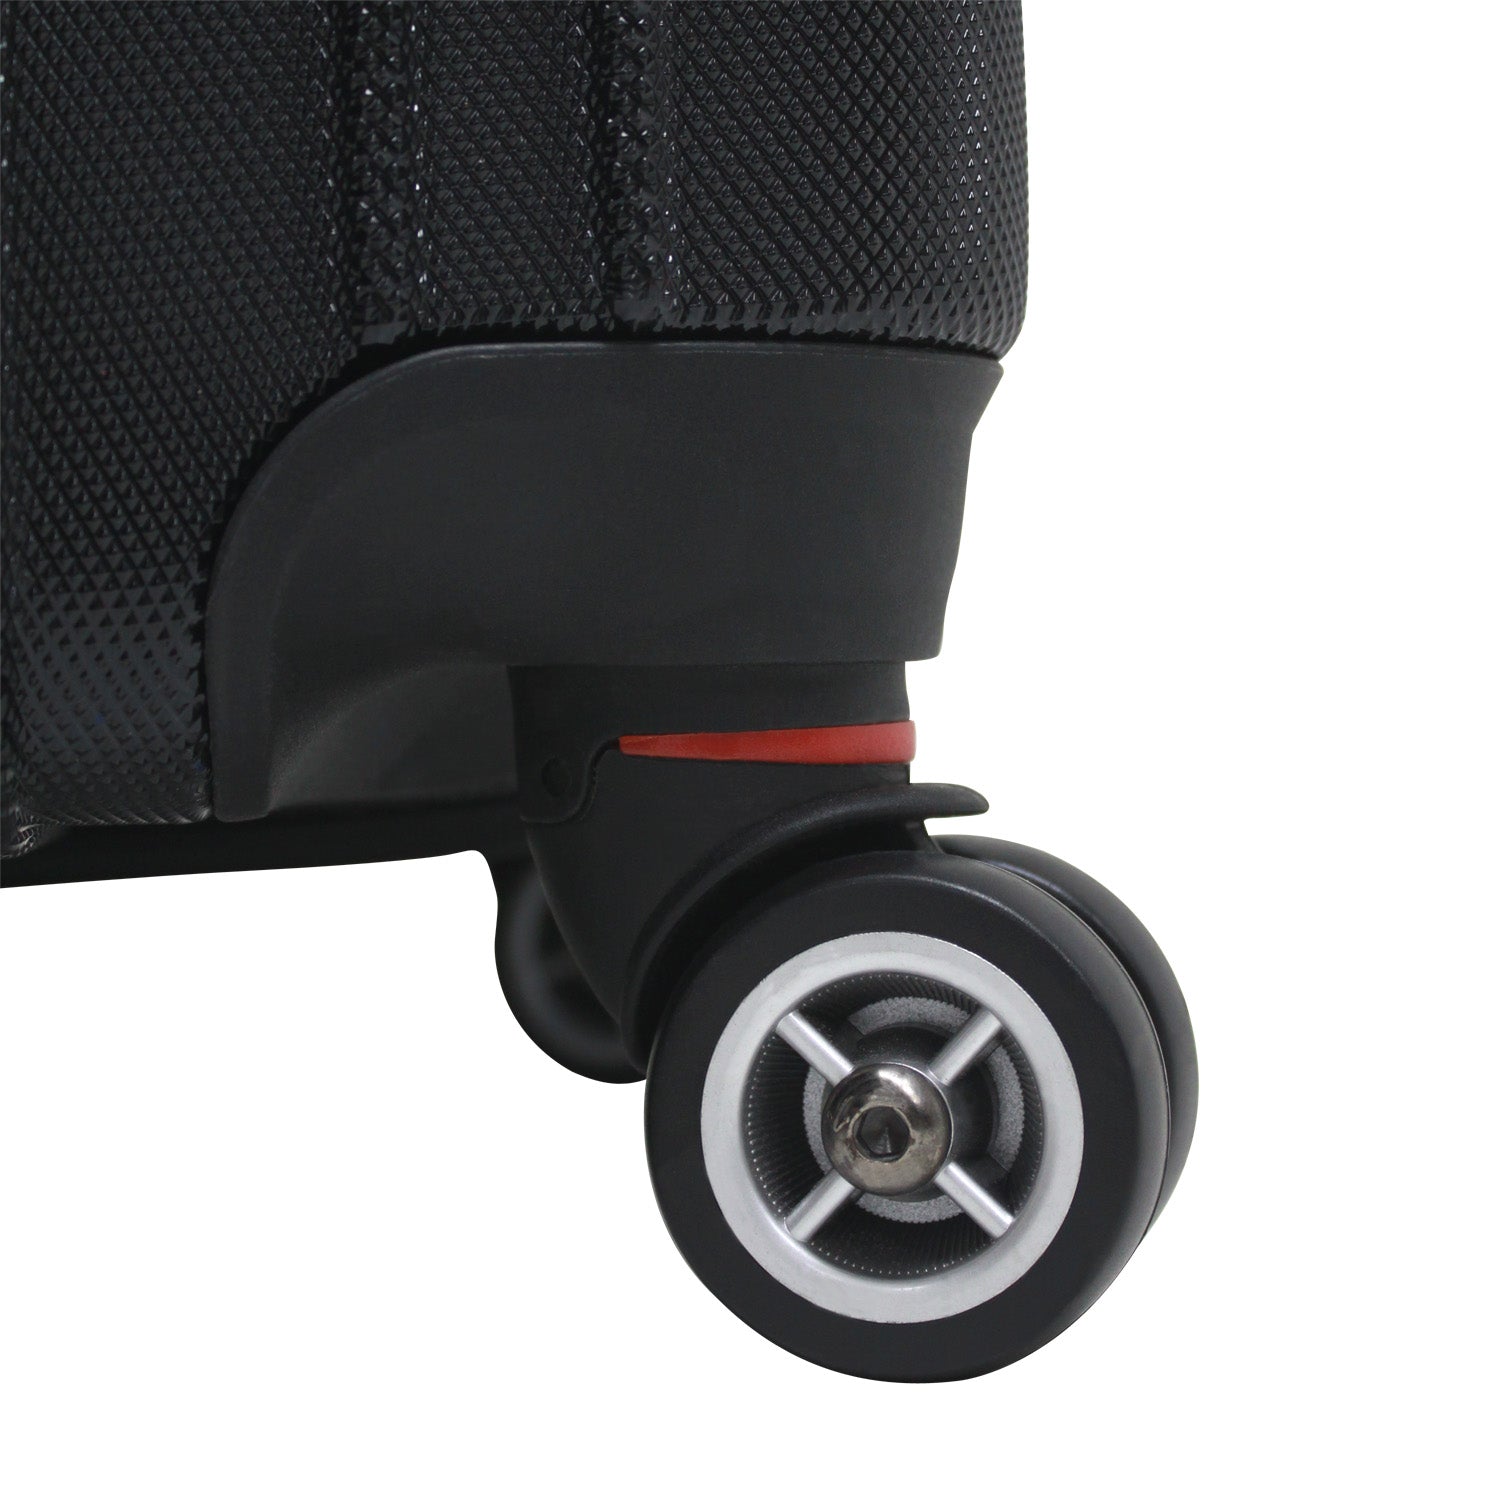 An image of a black luggage and black wheels.